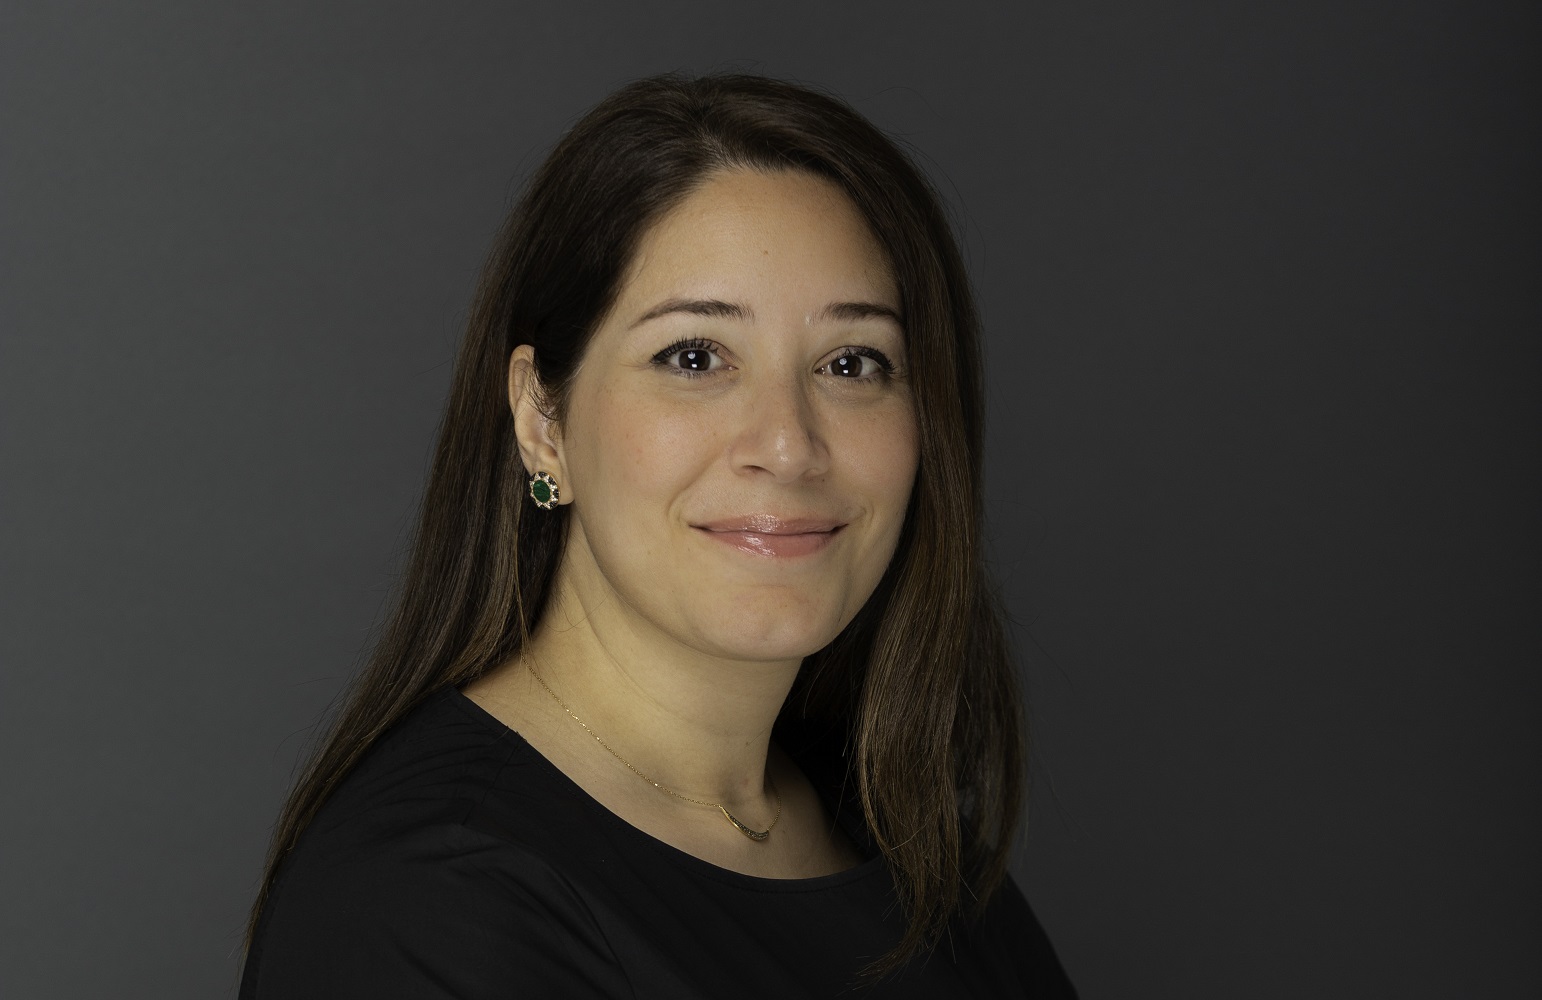 Dentsu MENA Appoints Maya Tayara as First Head of Client Engagement and Growth